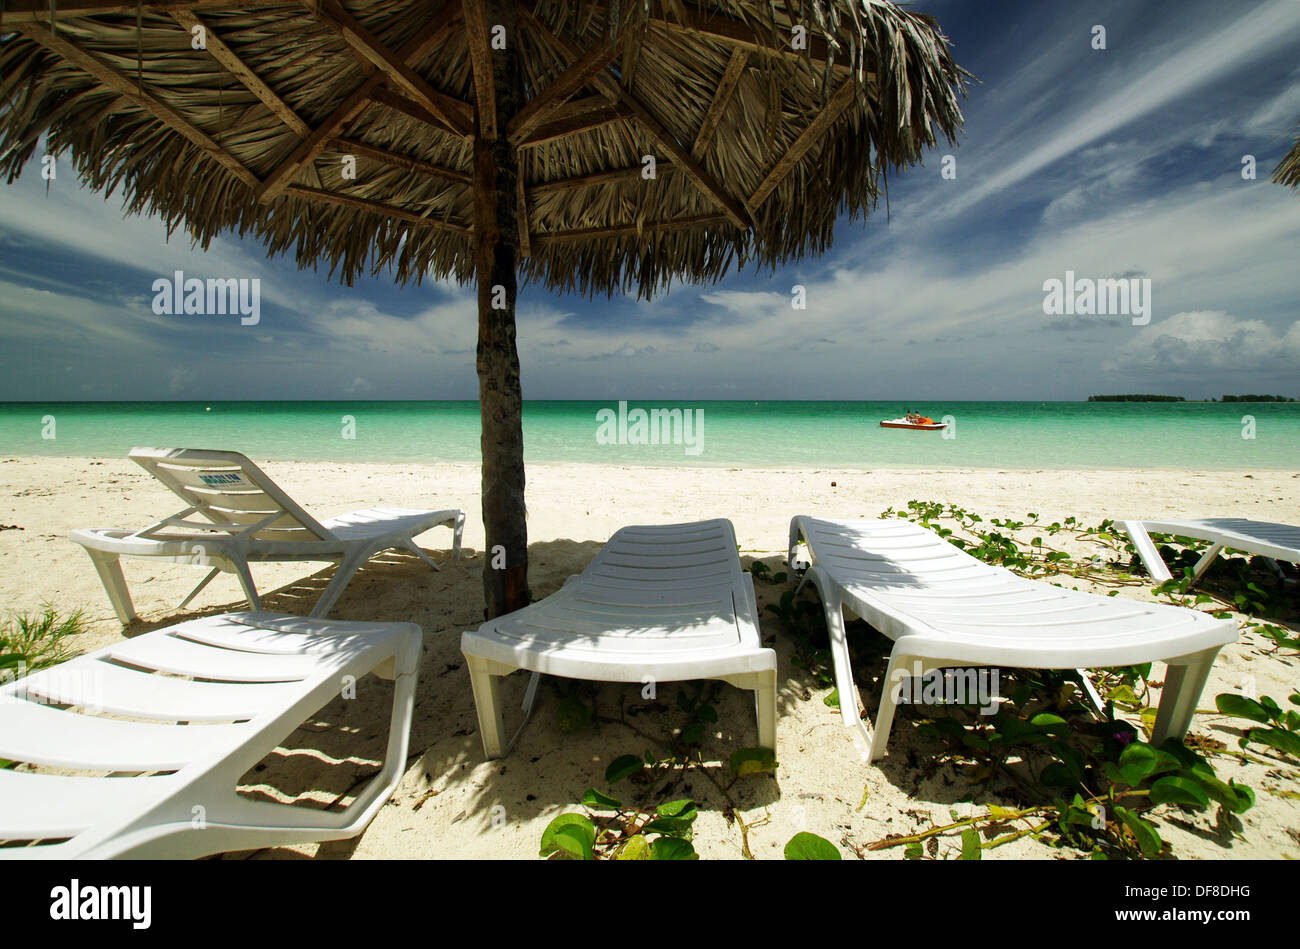 Play Pilar, one of the best Cuban beaches - Cayo Guillermo, Cuba Stock Photo